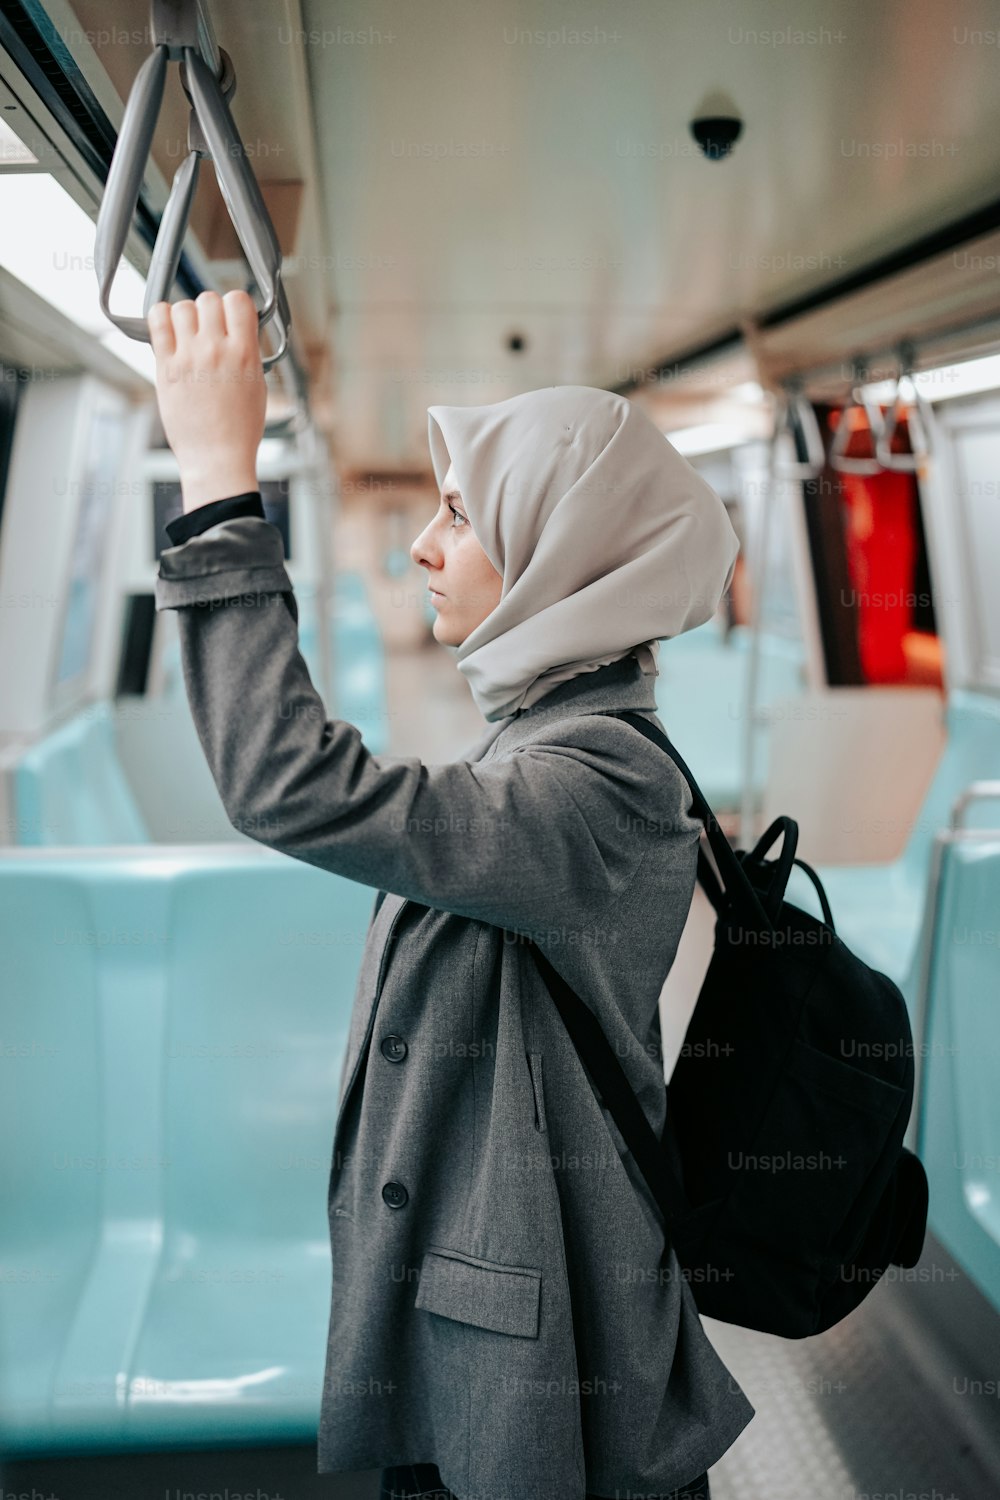 a woman in a hijab is on a train